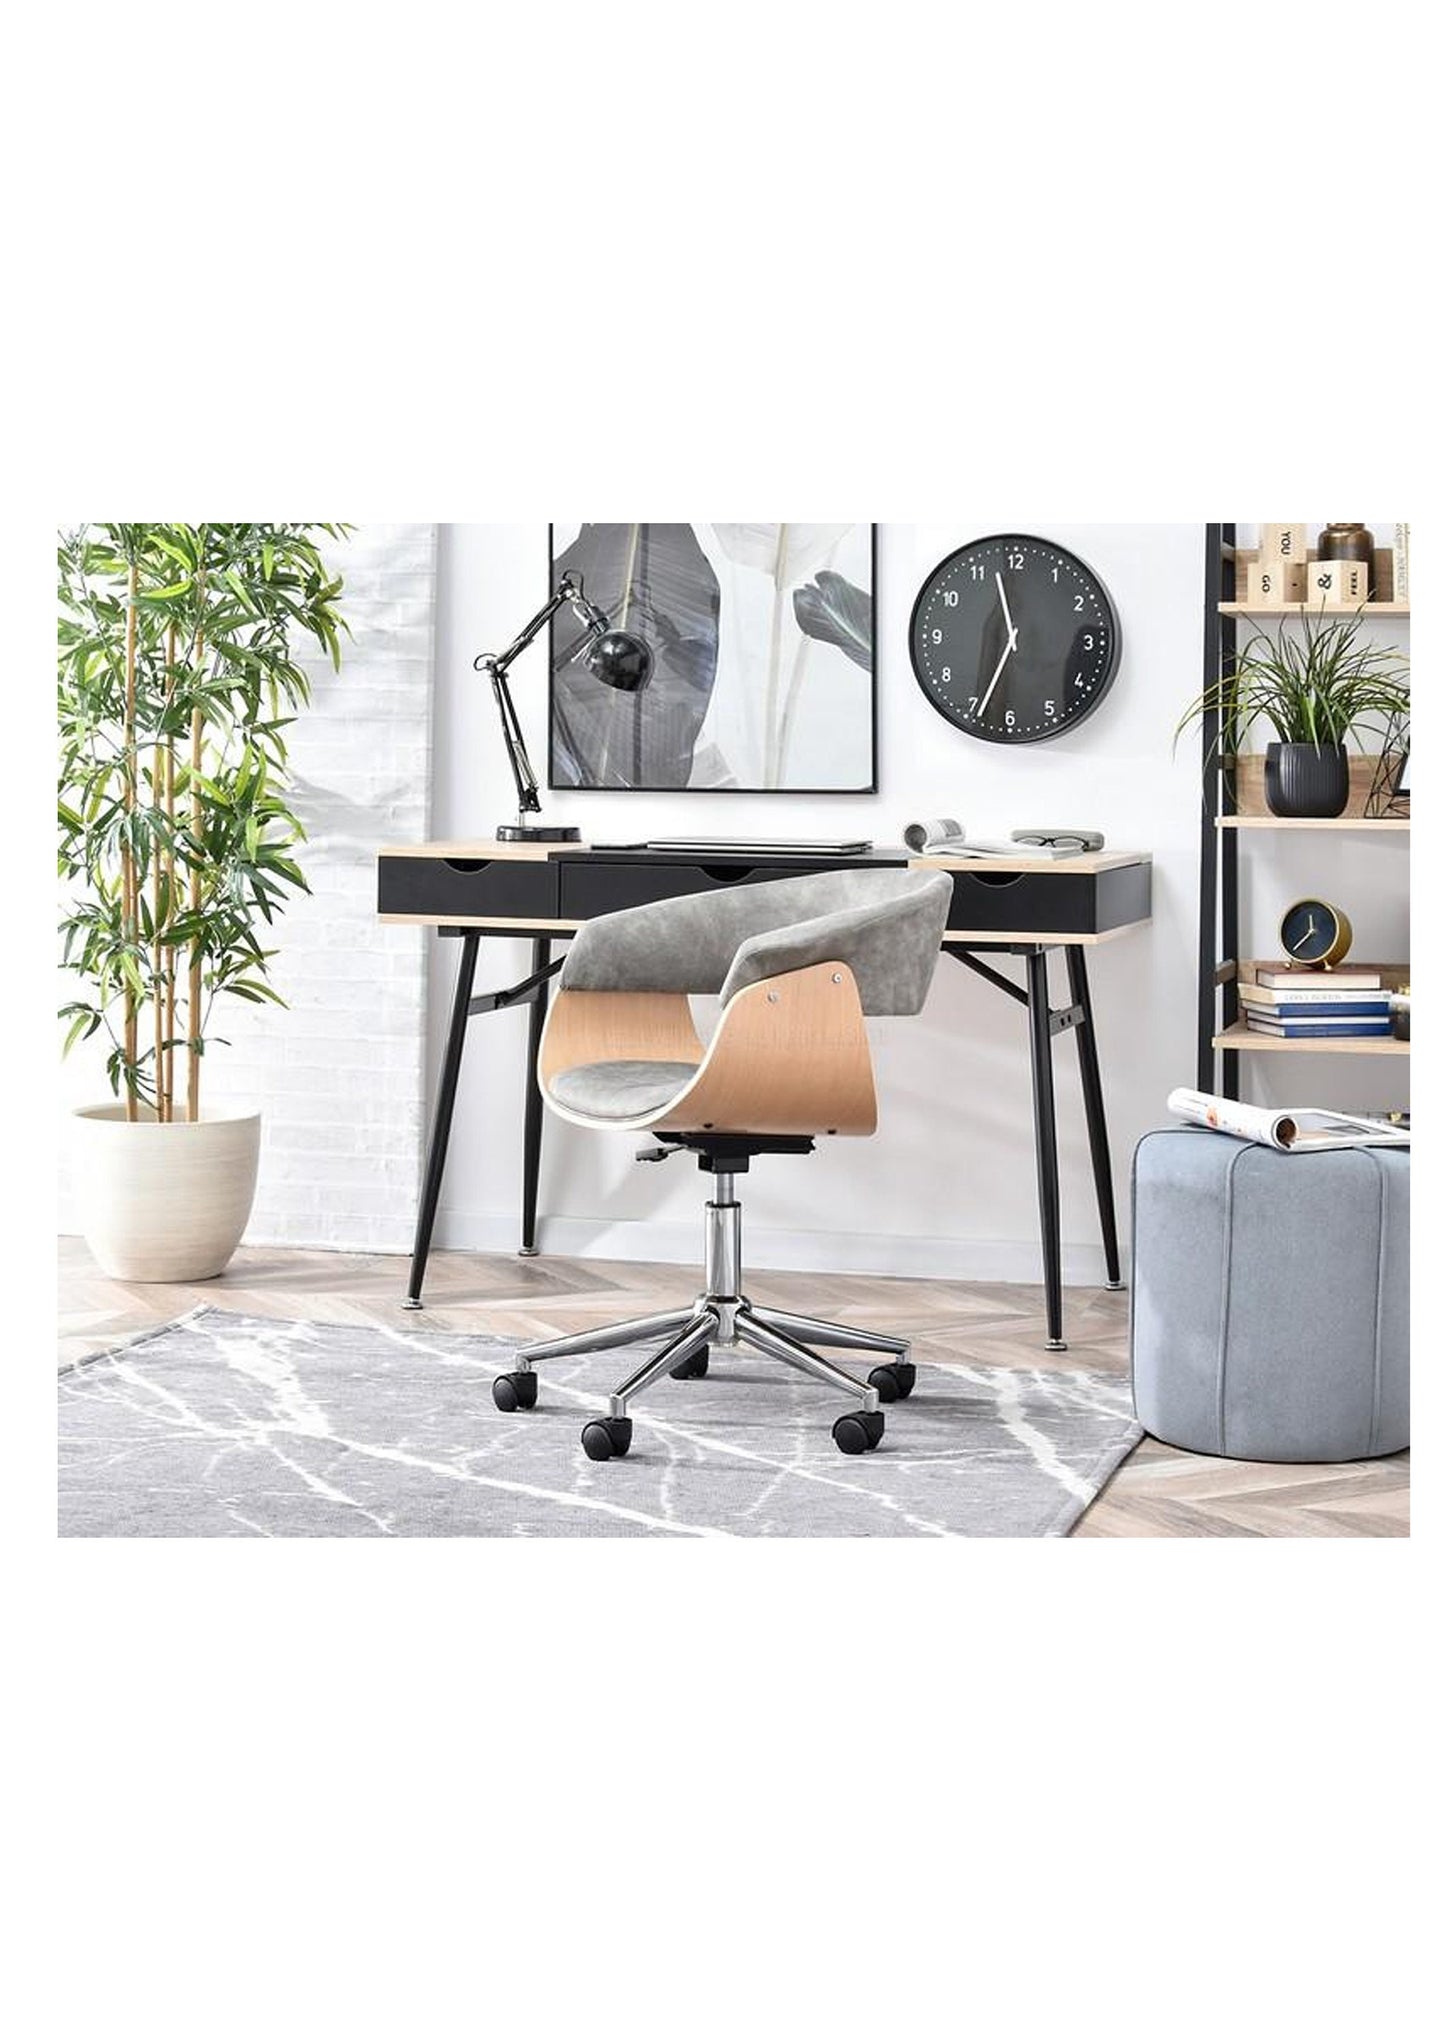 NEW RETRO Style Adjustable Swivel office desk chair grey and pine wood